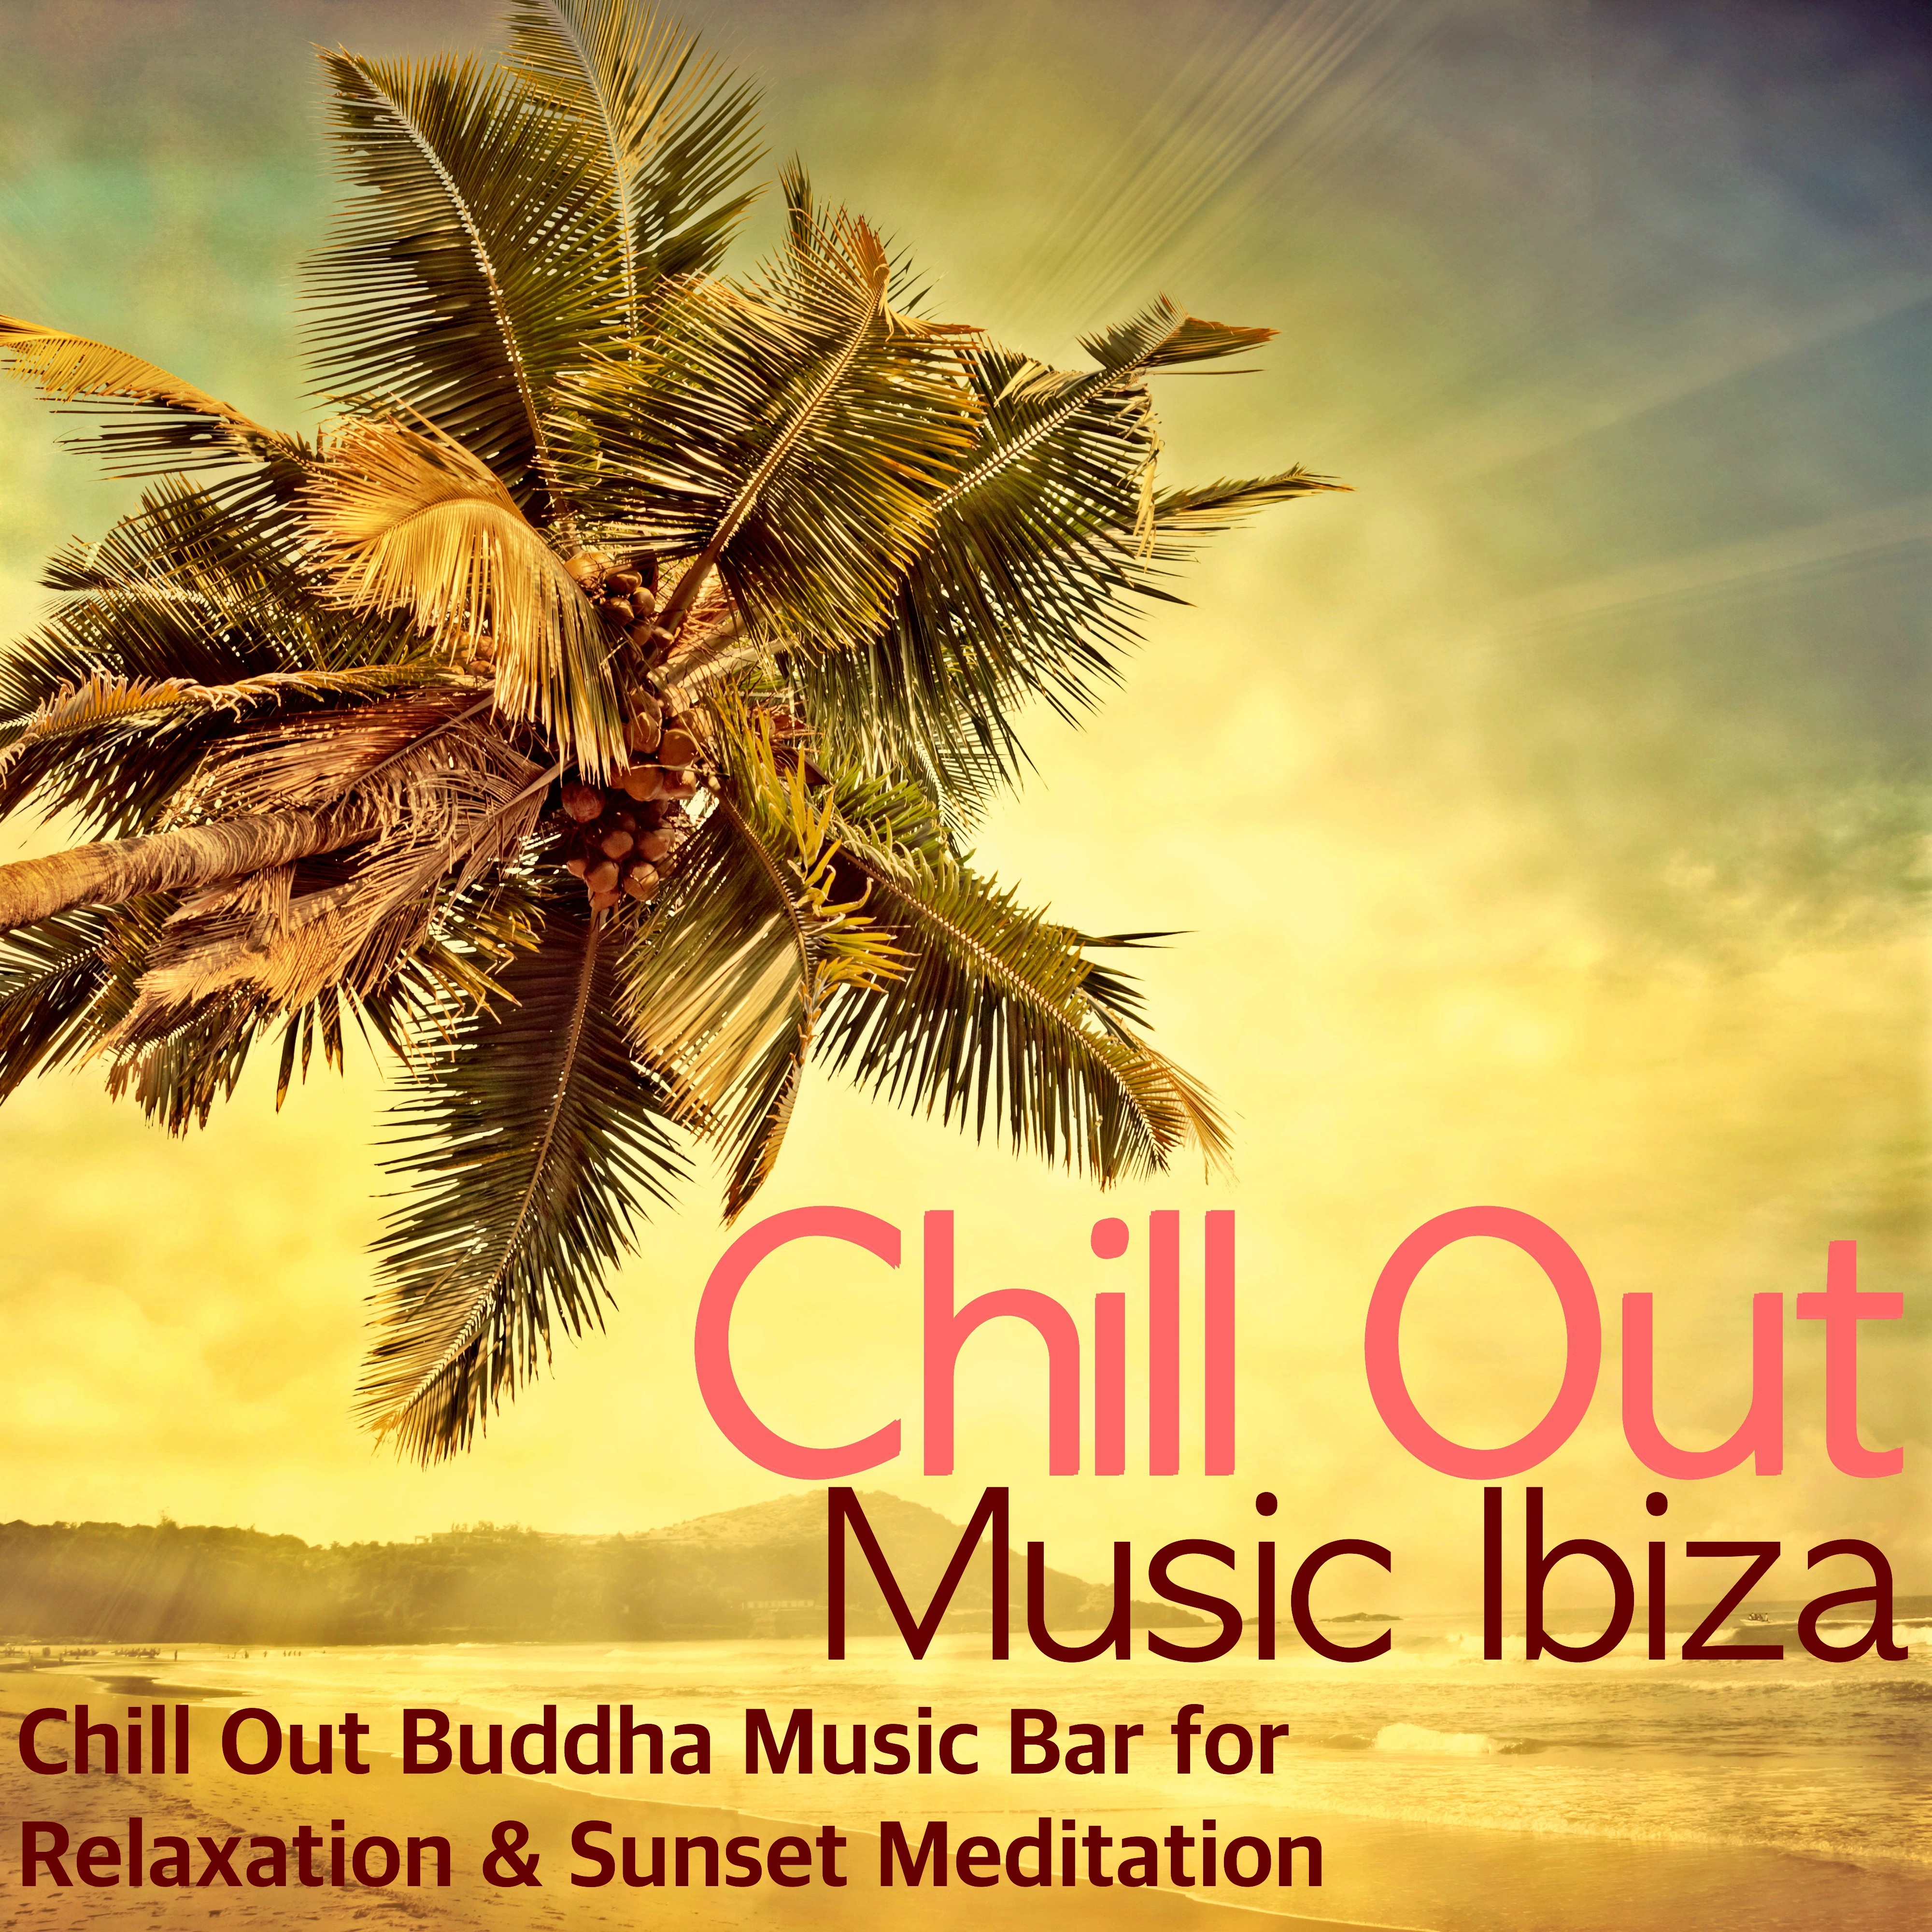 Chill Out Music Ibiza - Chill Out Buddha Music Bar for Relaxation & Sunset Meditation